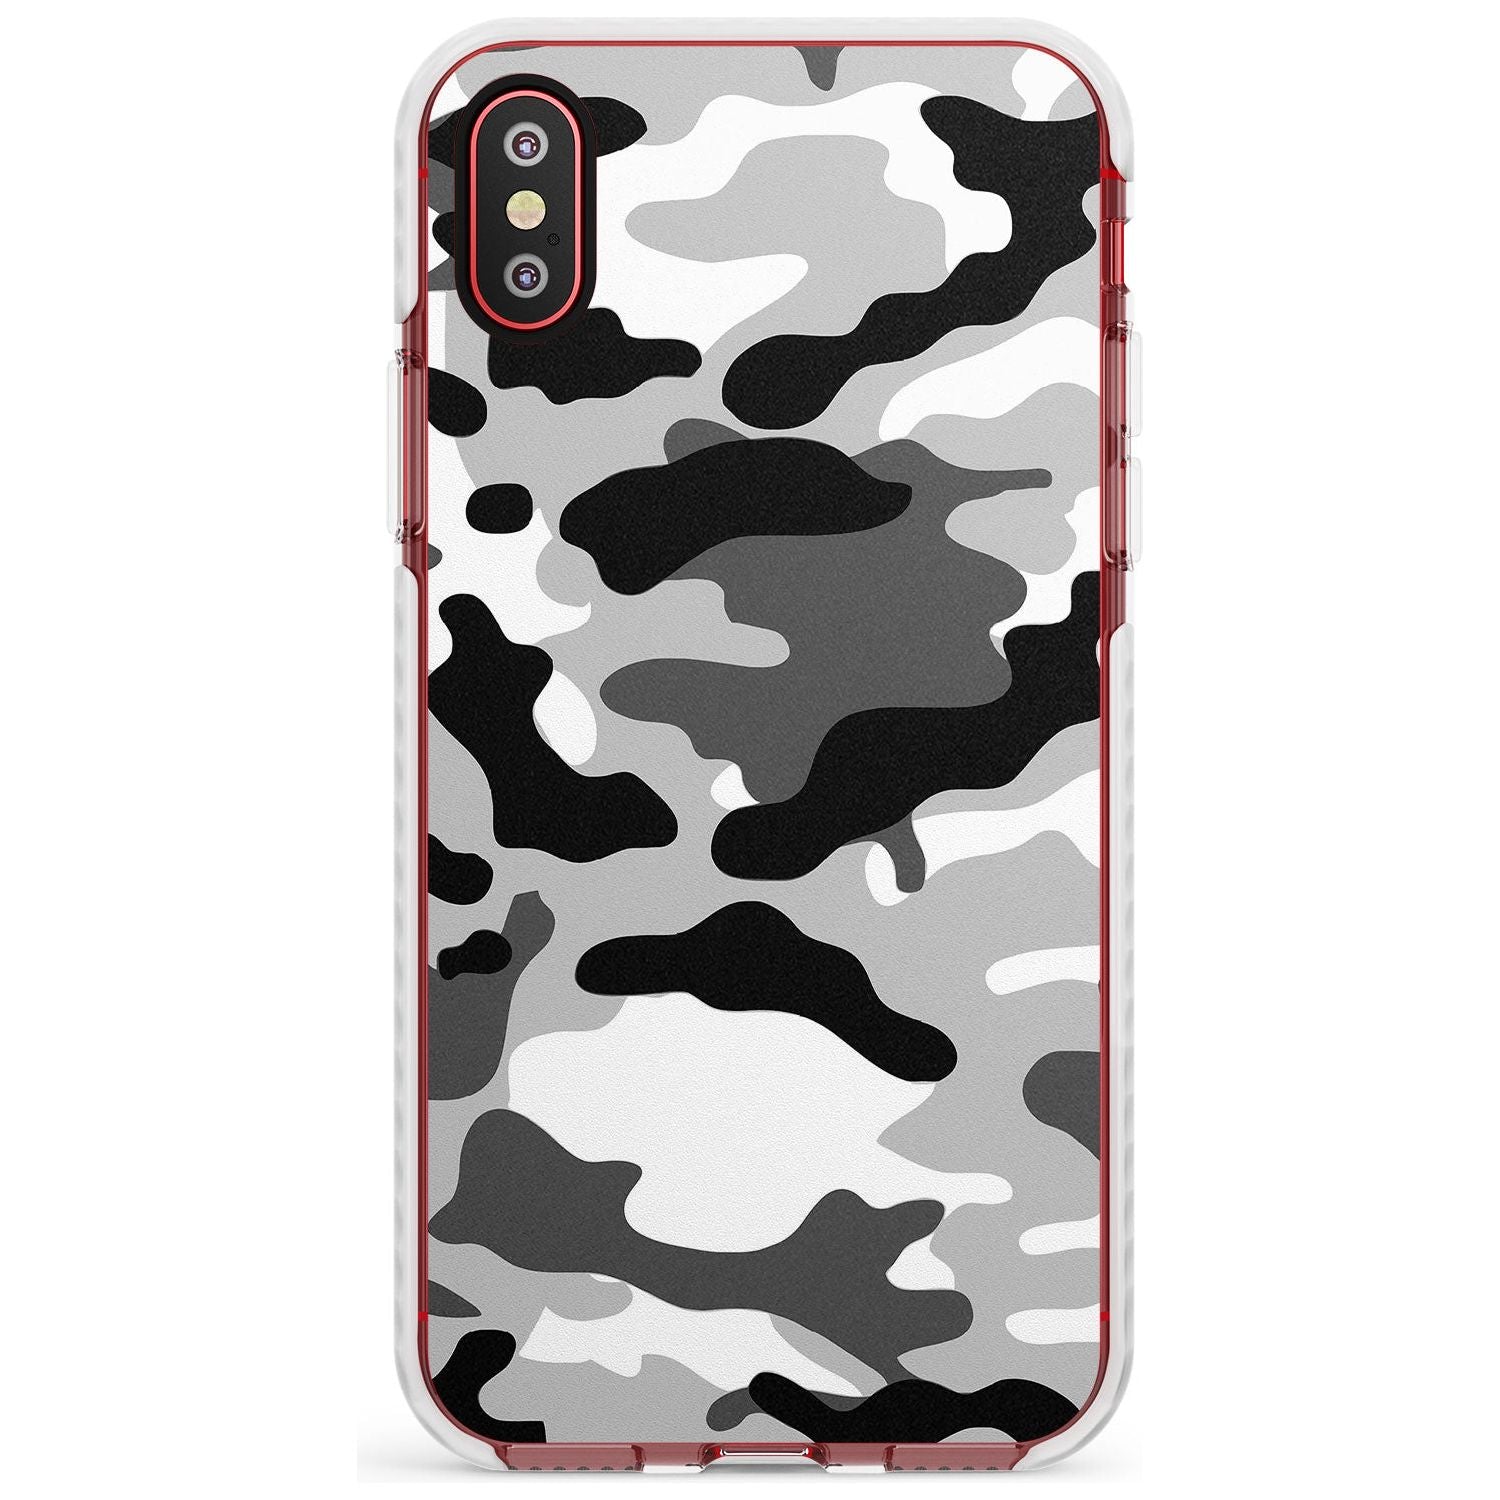 Grey Camo Impact Phone Case for iPhone X XS Max XR